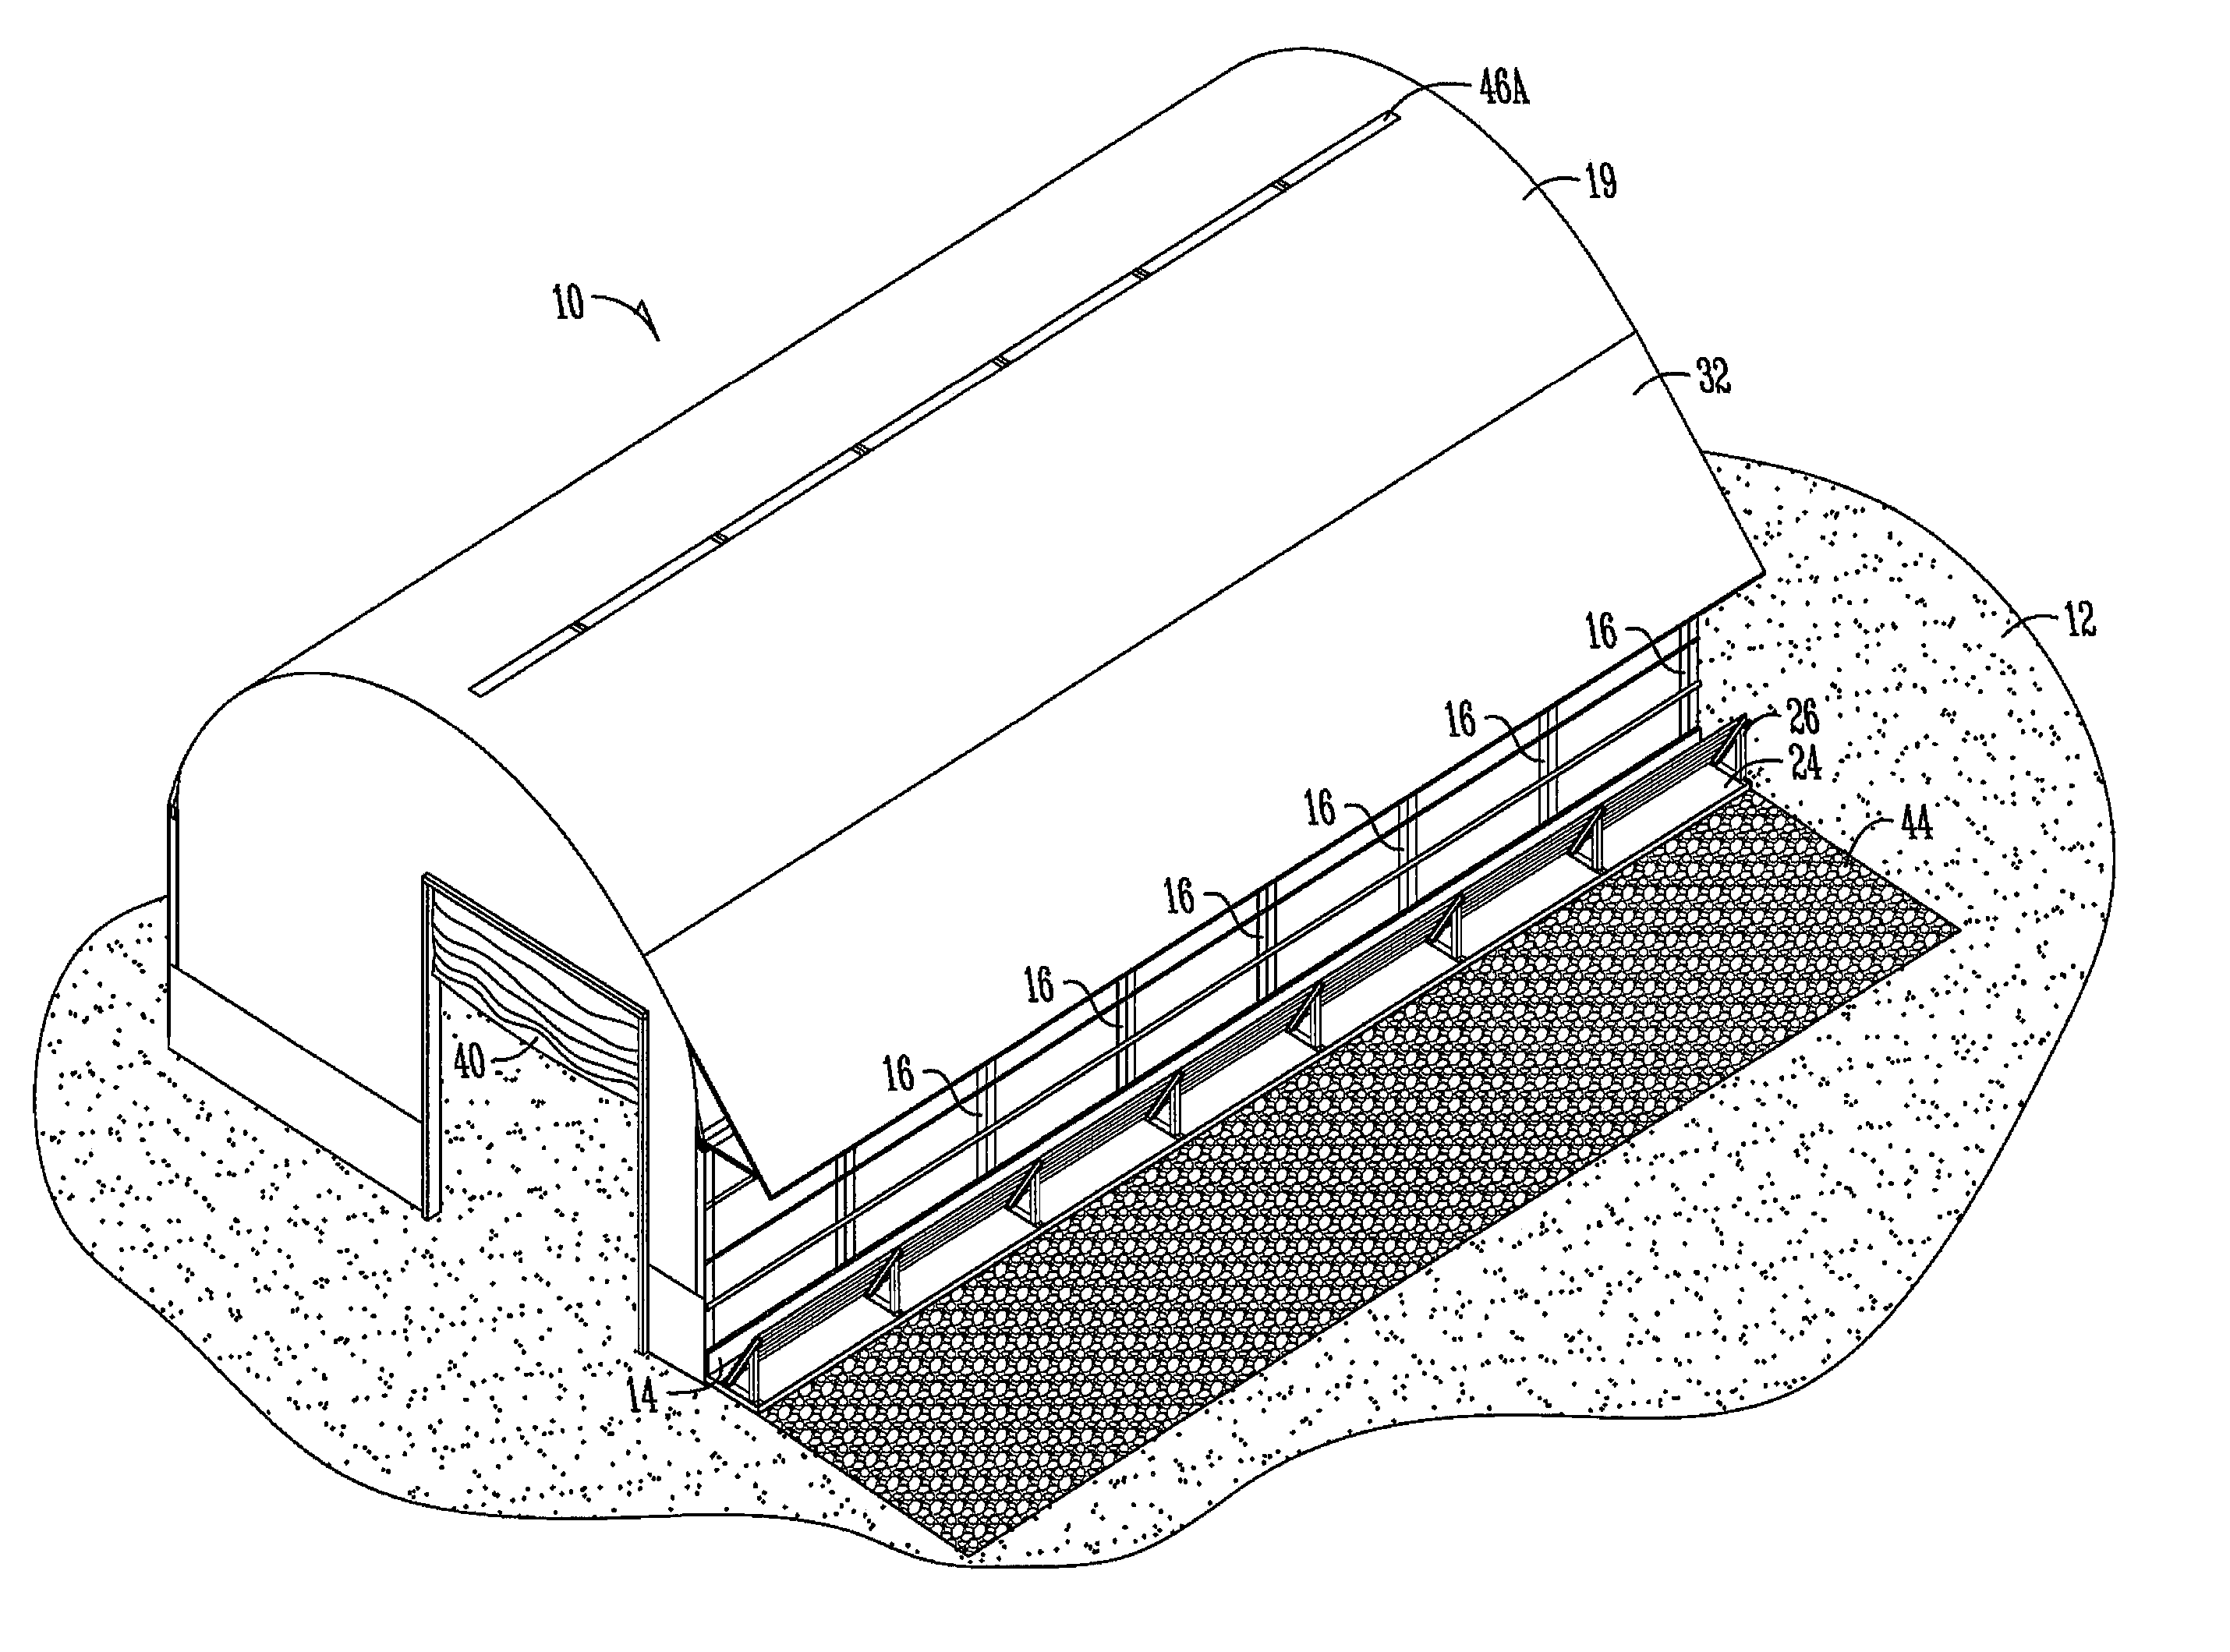 Cattle Feeding System and Shelter to Create a Controlled Environment